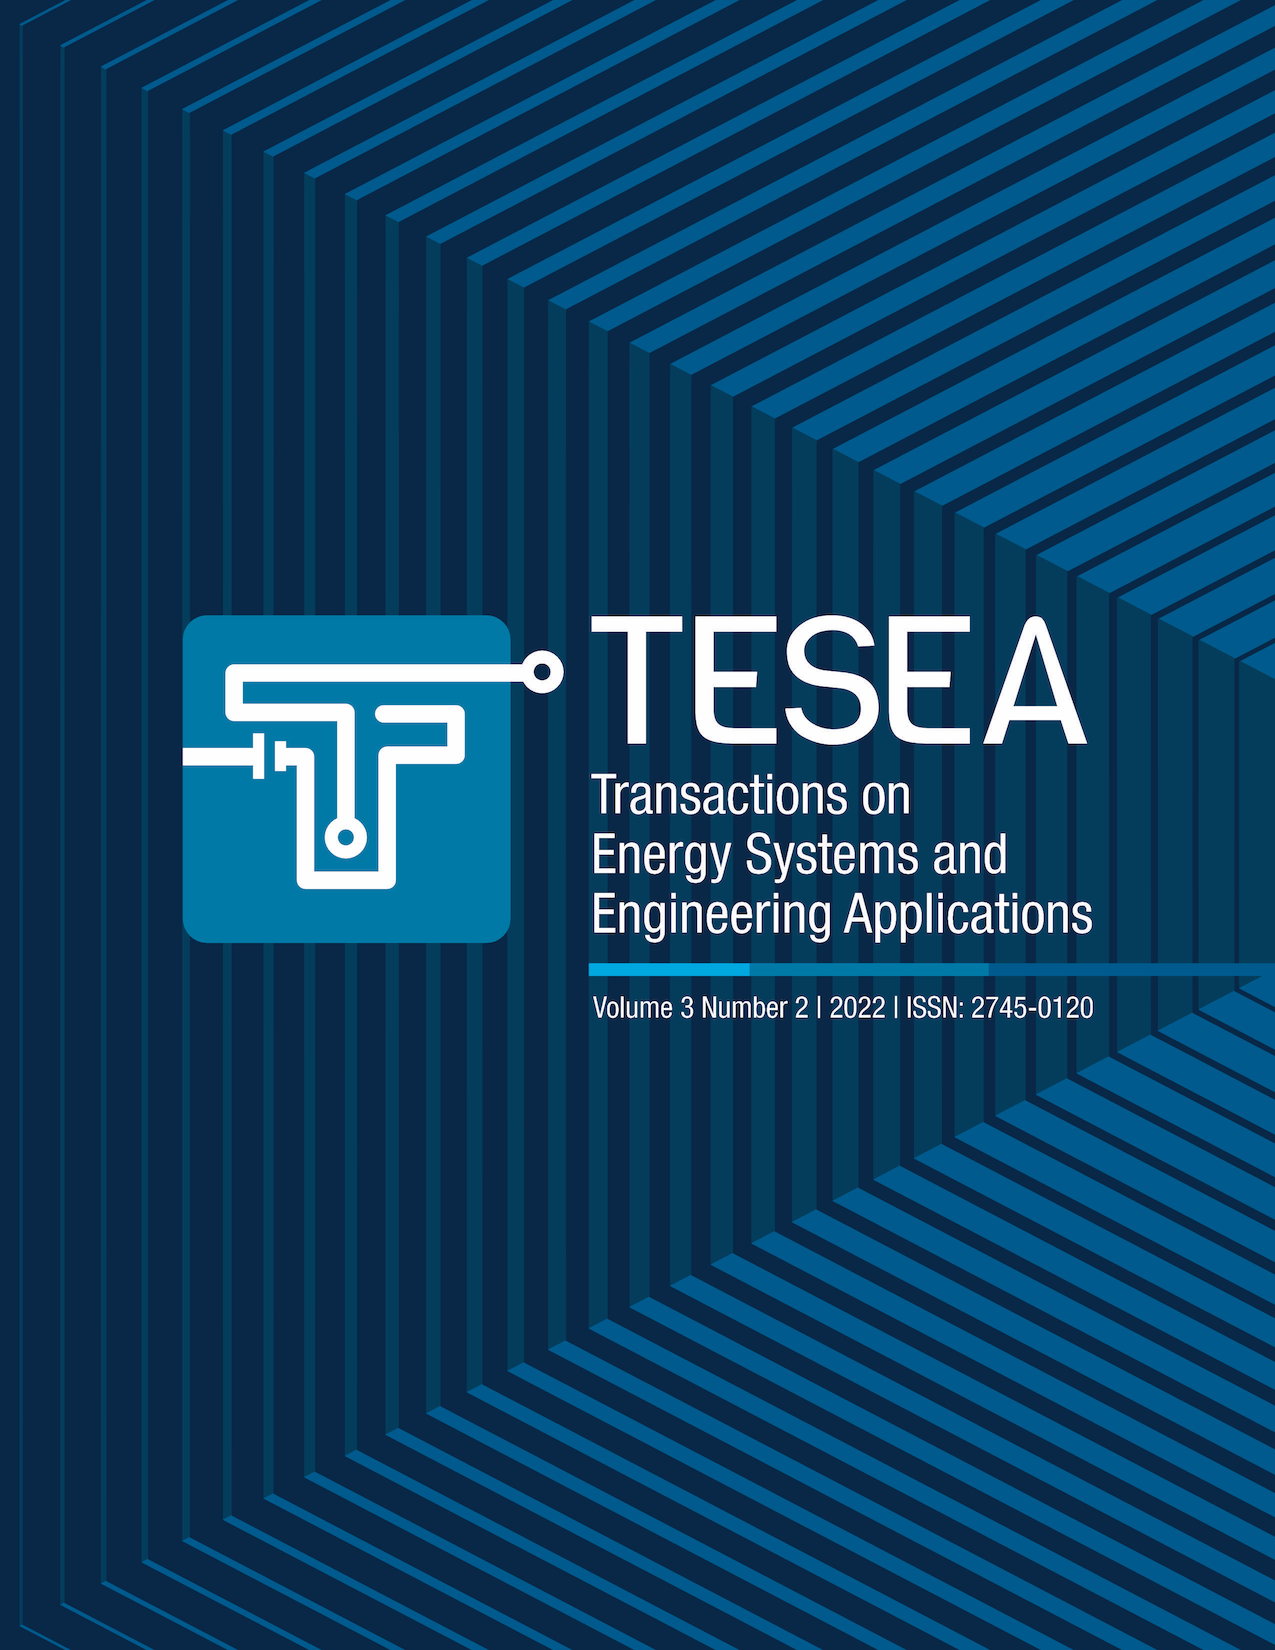 Transactions on energy systems and engineering applications vol 3 No 2 cover